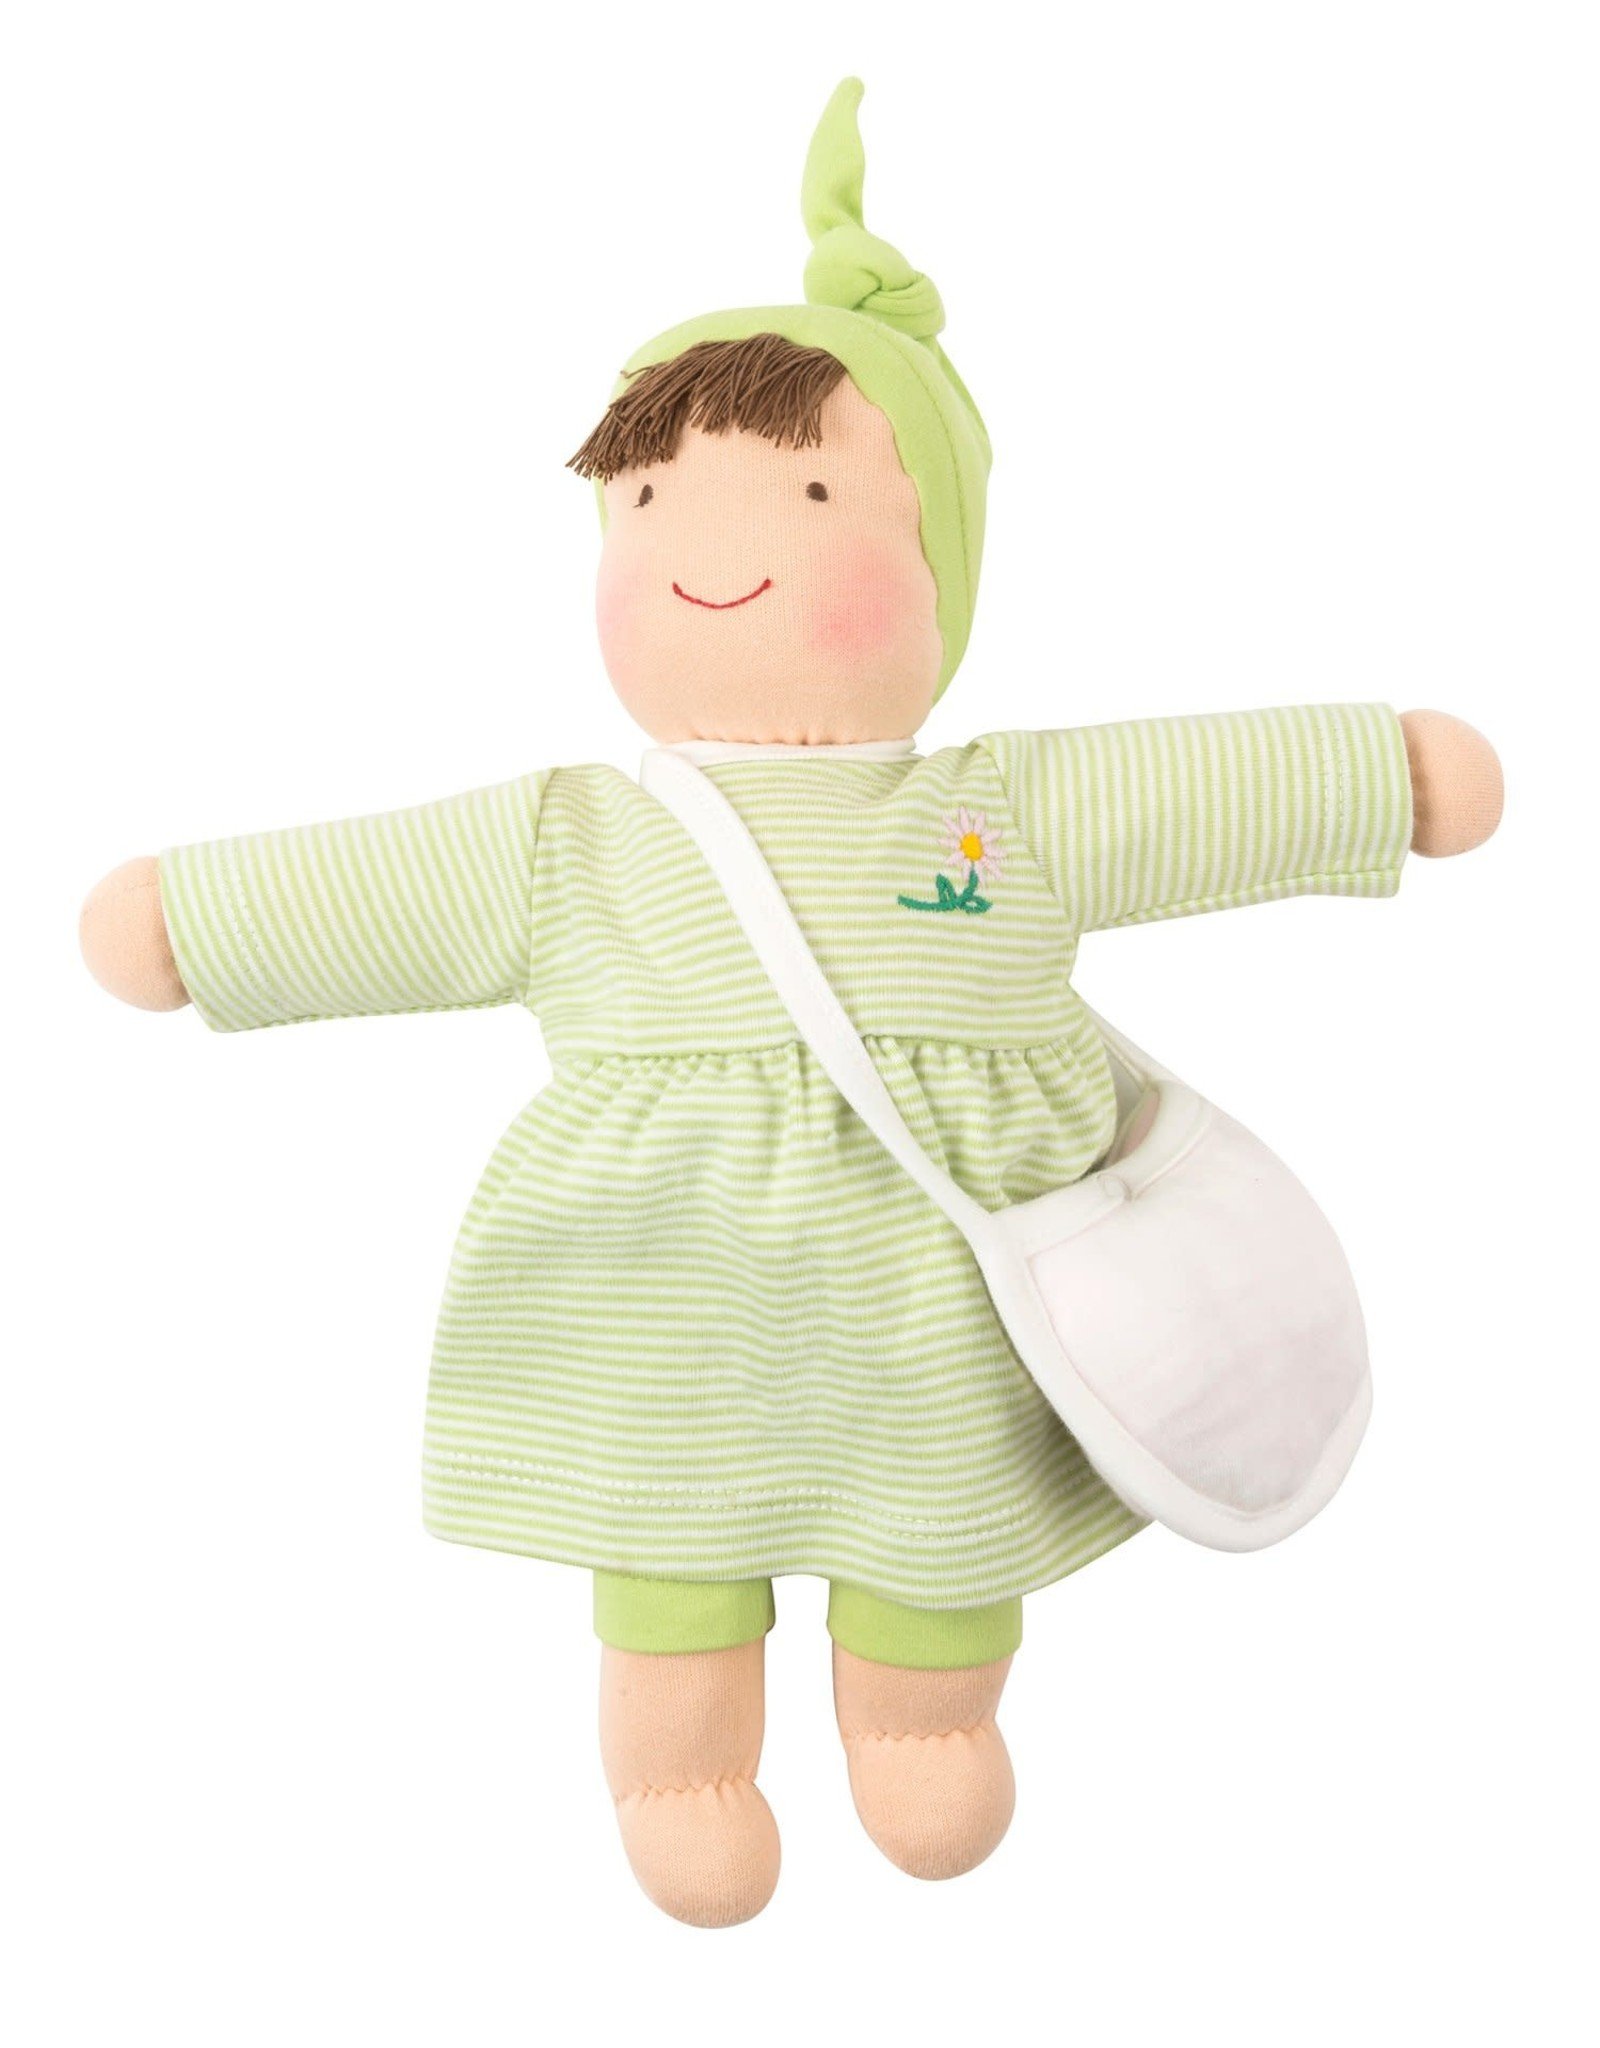 Under the Nile Under the Nile Waldorf Dress Up Doll - 13"